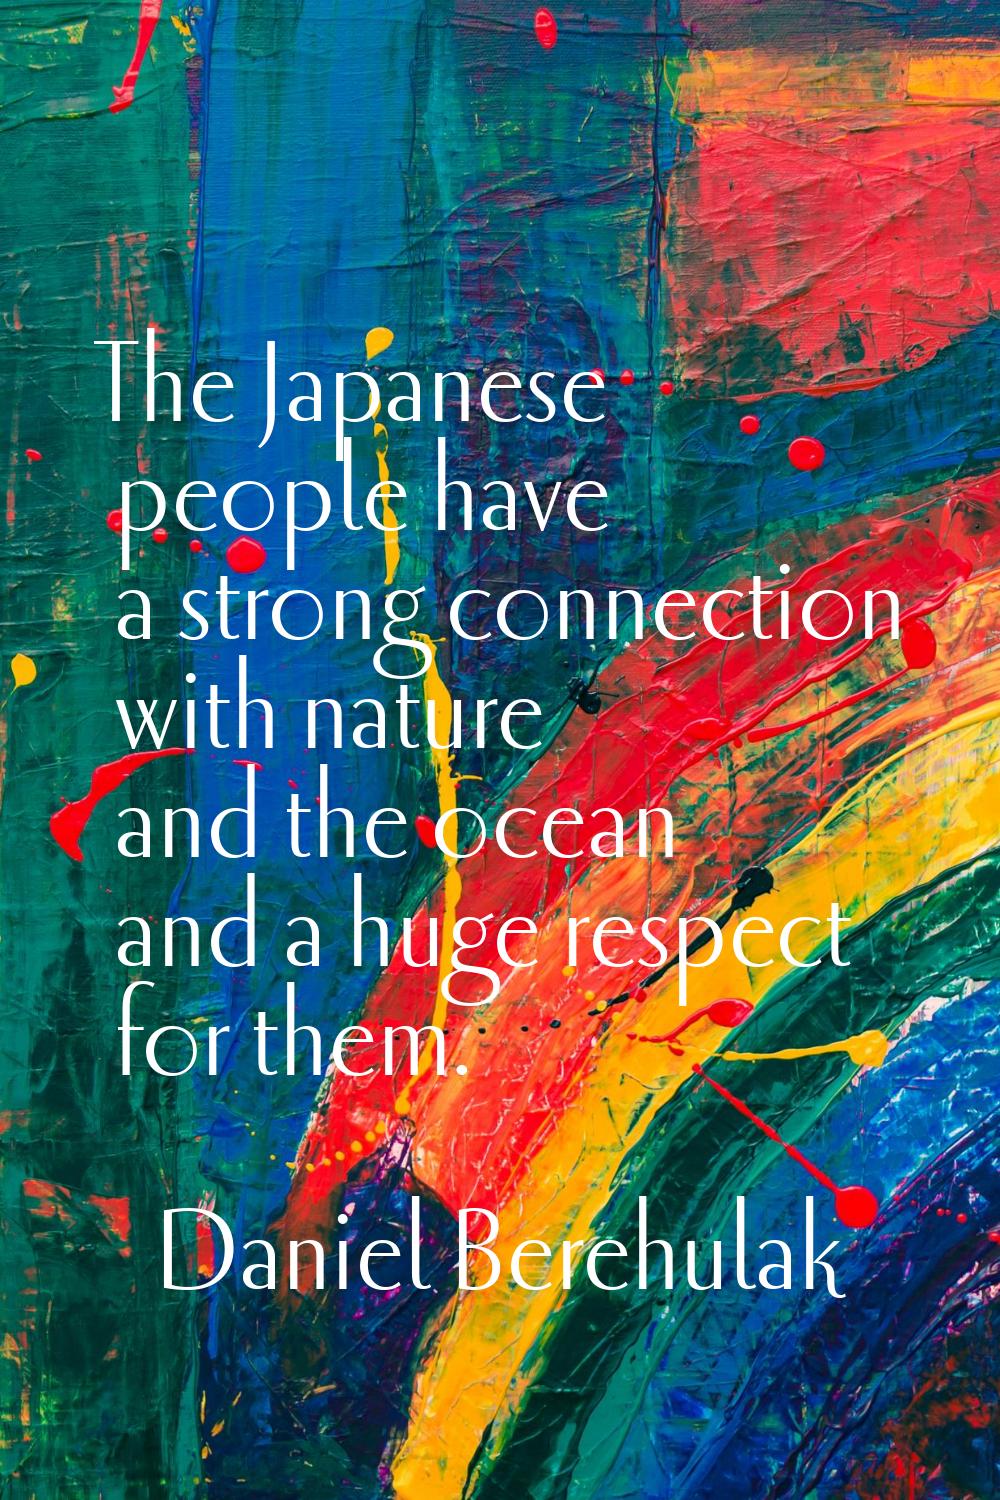 The Japanese people have a strong connection with nature and the ocean and a huge respect for them.